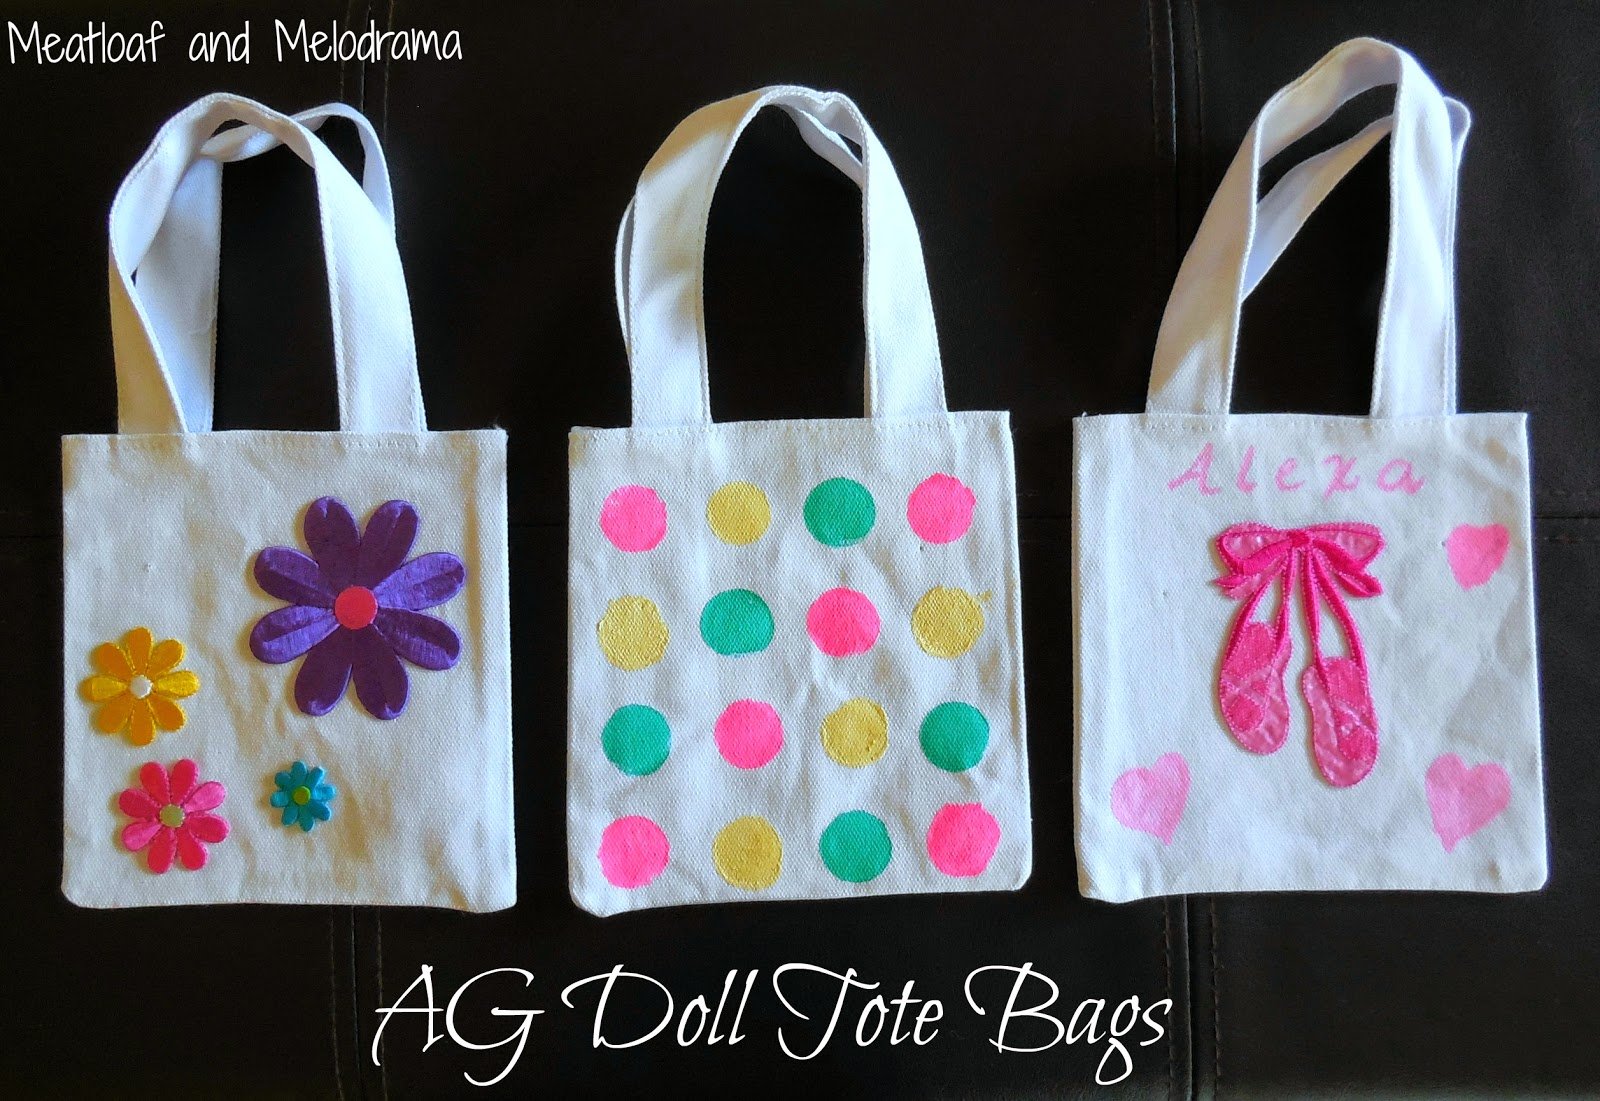 American Girl Doll Tote Bags - Meatloaf and Melodrama